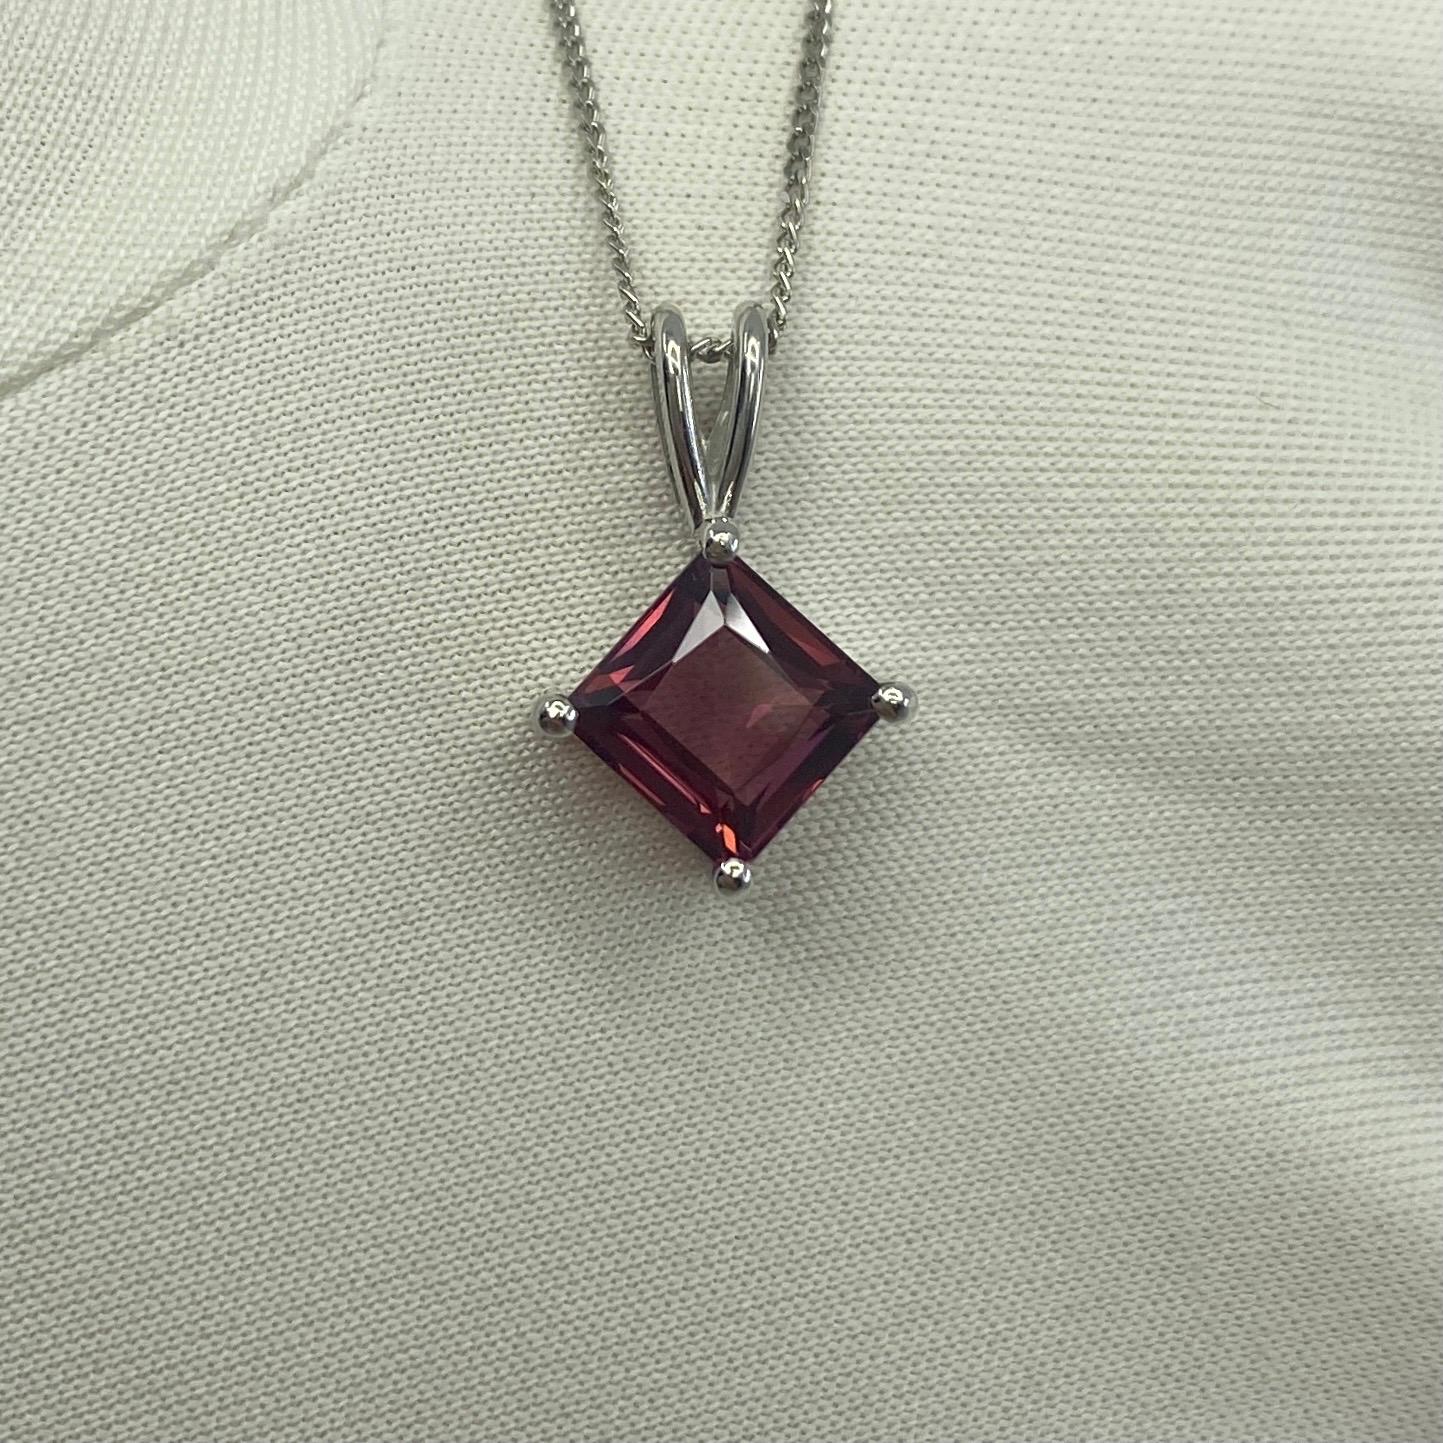 Fine Square Cut Rhodolite Garnet Platinum Pendant Necklace.

1.75 Carat Rhodolite with a stunning pink purple colour and excellent clarity, very clean stone with only some small natural inclusions visible when looking closely. Set in a fine 950